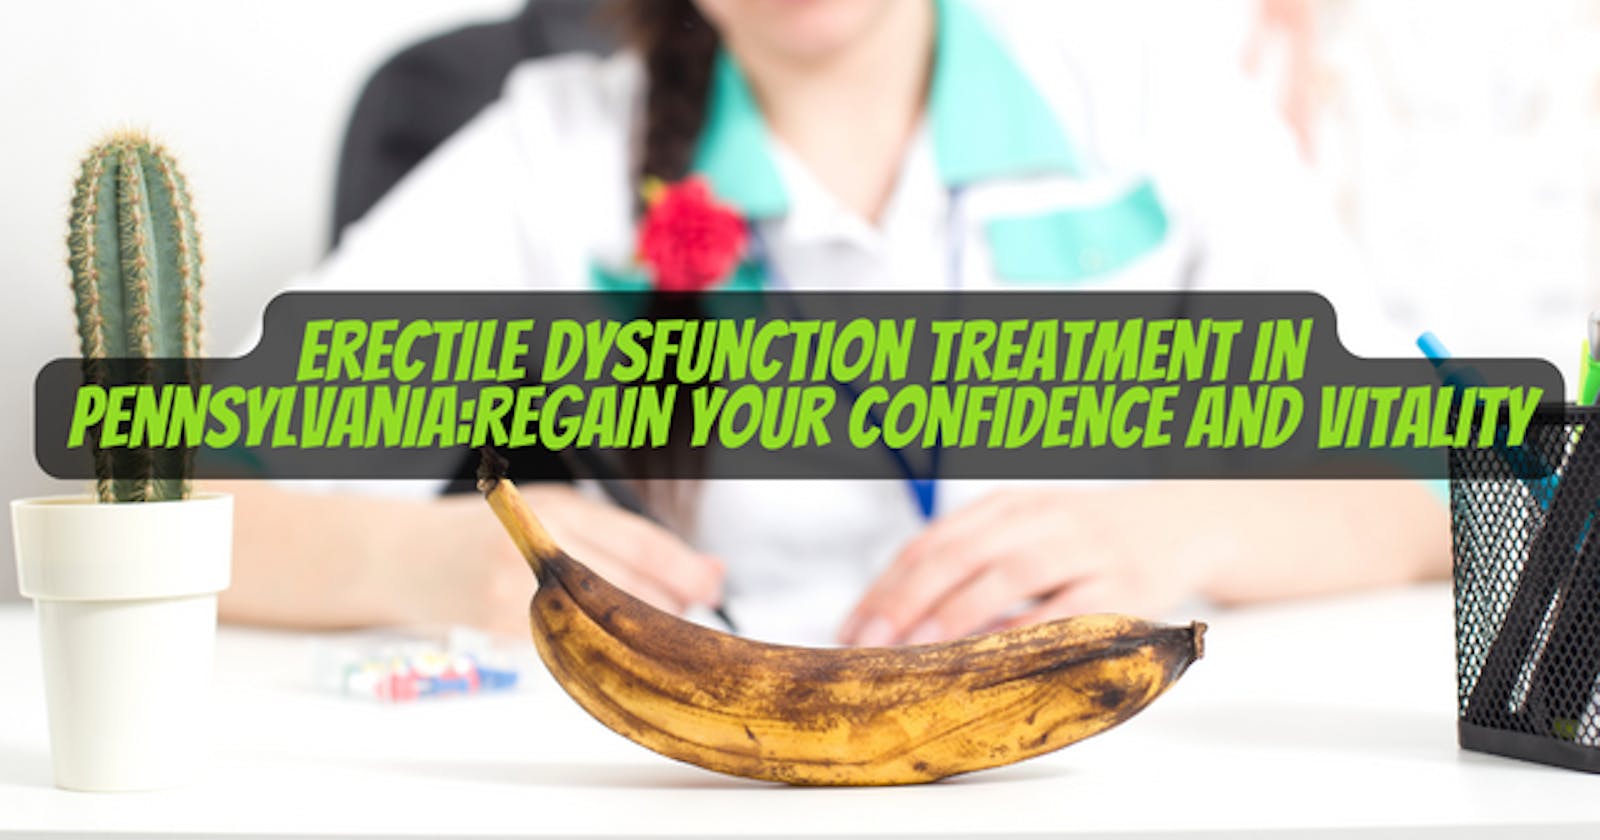 Erectile Dysfunction Treatment in Pennsylvania: Regain Your Confidence and Vitality